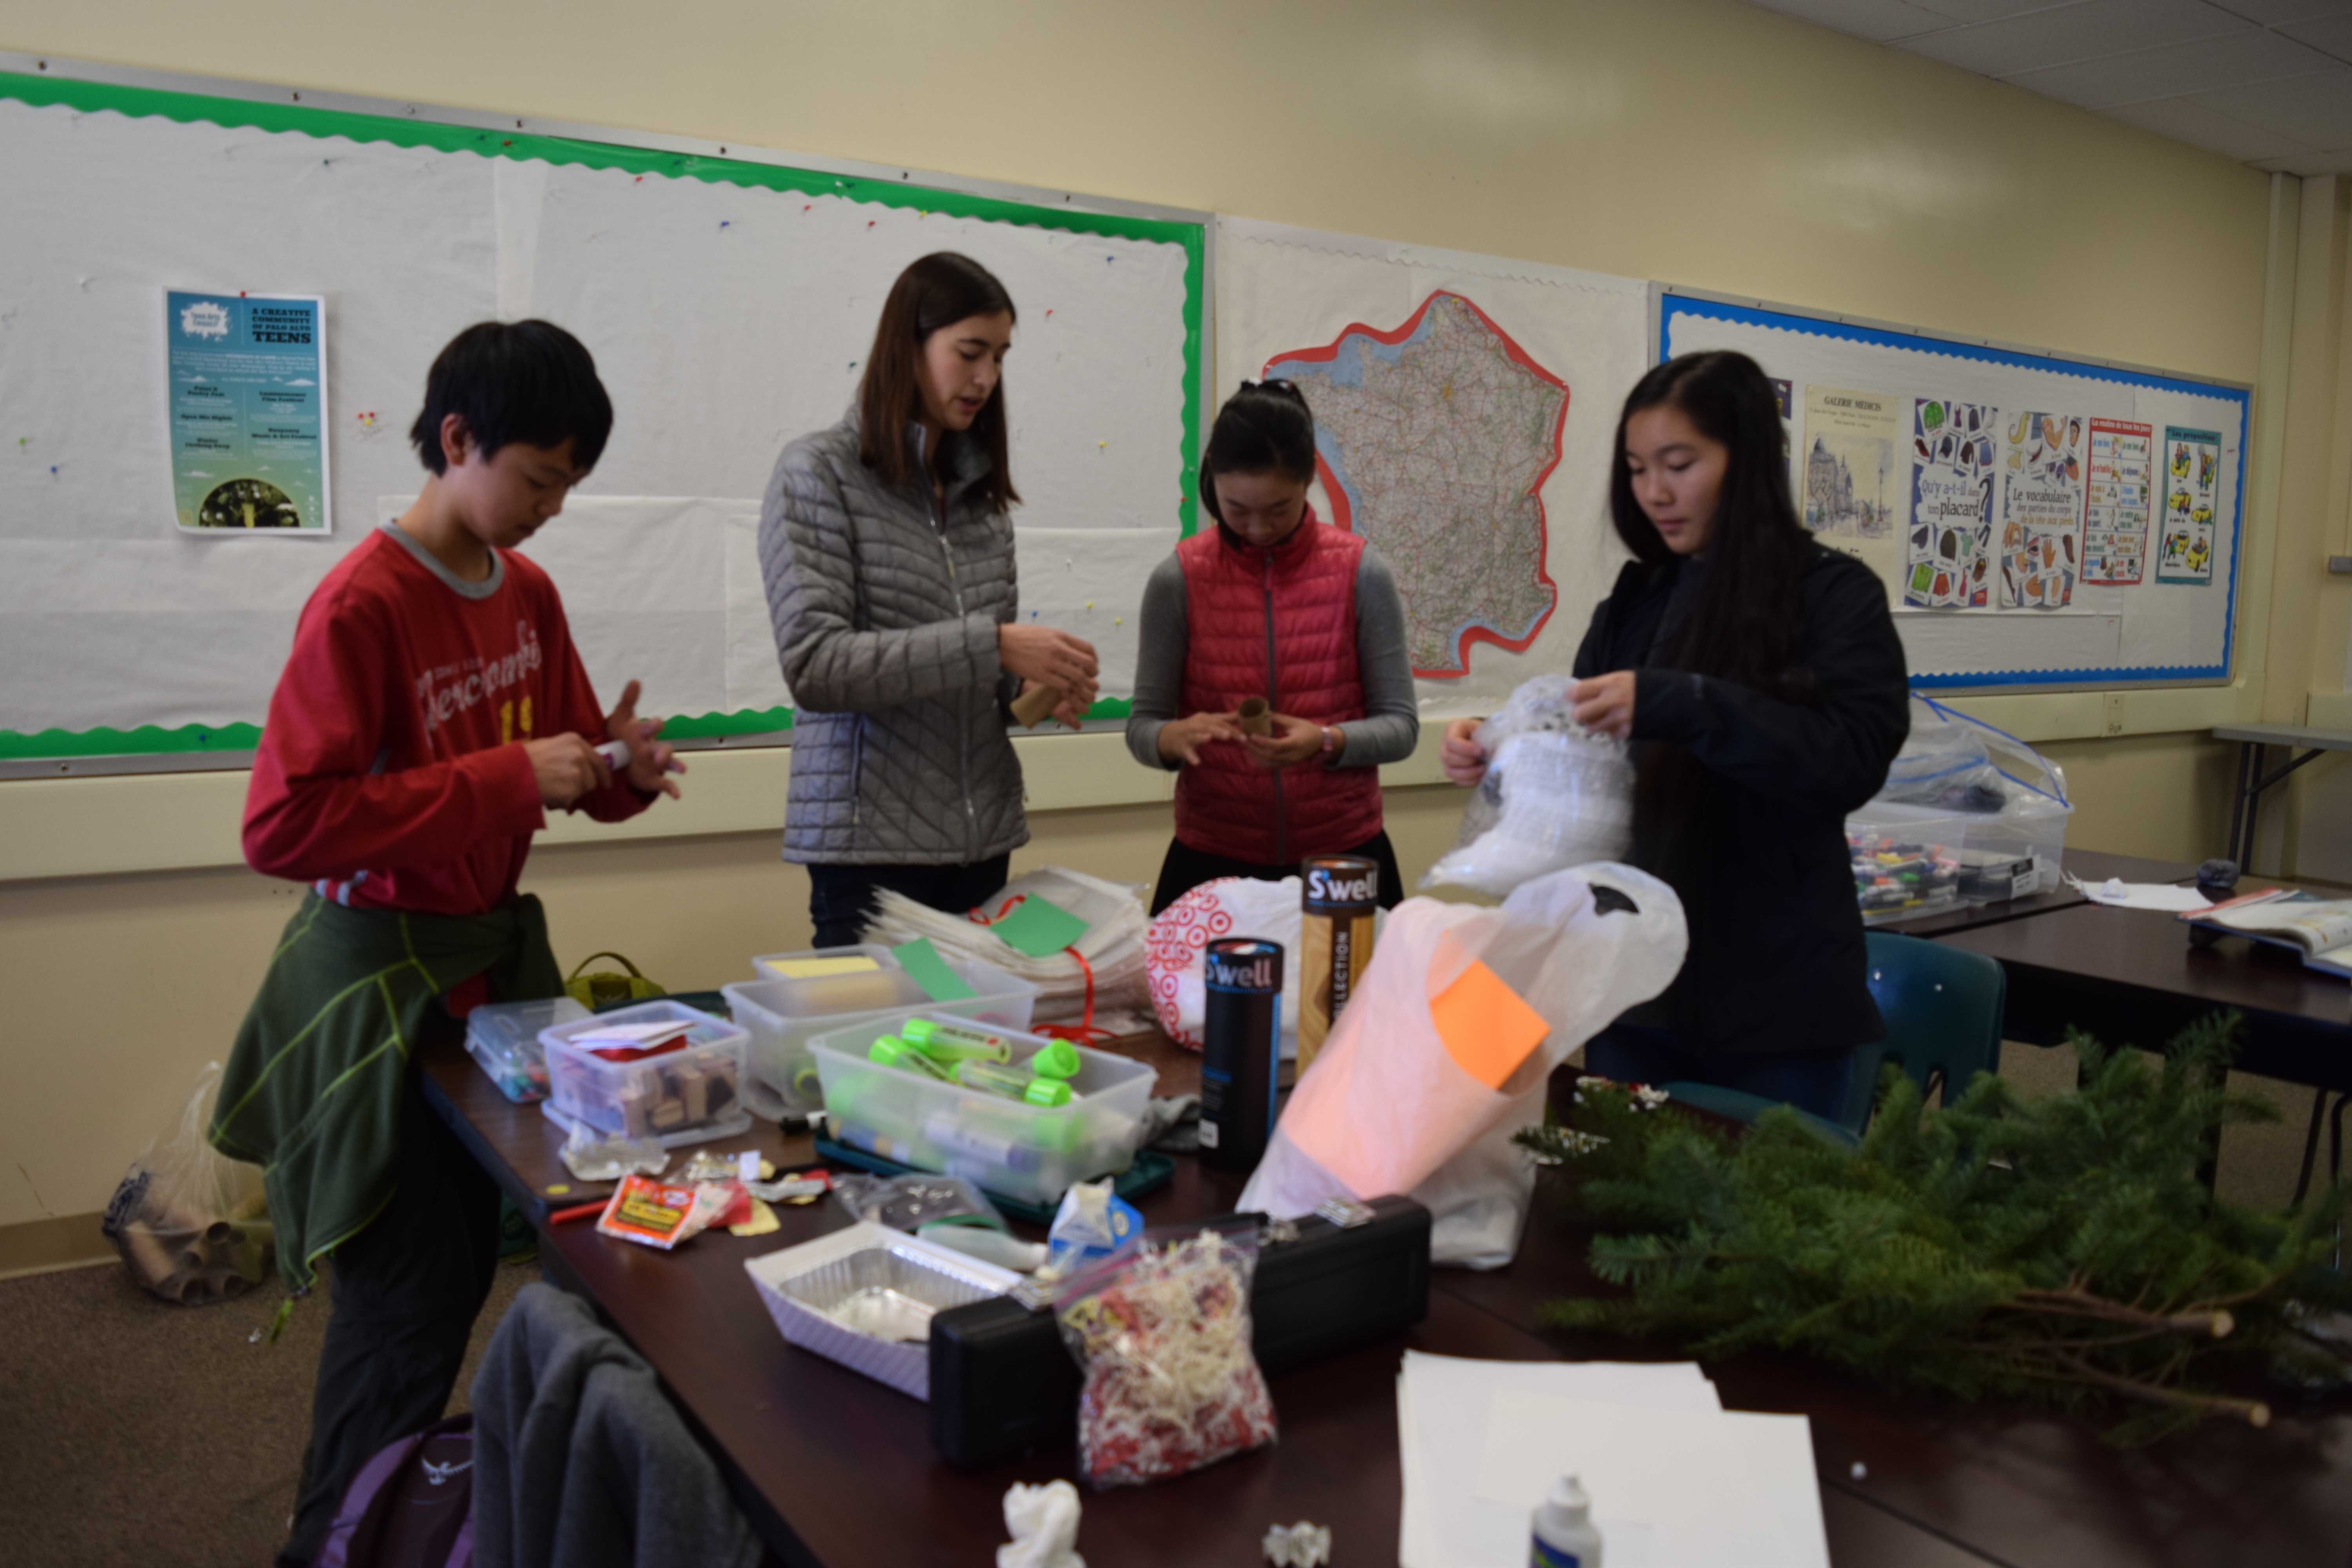  Members of Zero Waste Initiative Club Zander Leong, Olivia d'Arezzo, Aileen Wu and Club President Leila Tjiang (from left to right) prepare for tomorrow's Tap Out Tuesday event. Their booth will allow students to make holiday decorations out of old recyclables which they are welcome to take with them. "You can take it home to enjoy for the holidays, or offer it to a friend as a present," Tjiang said. Photo: Micaela Wong 